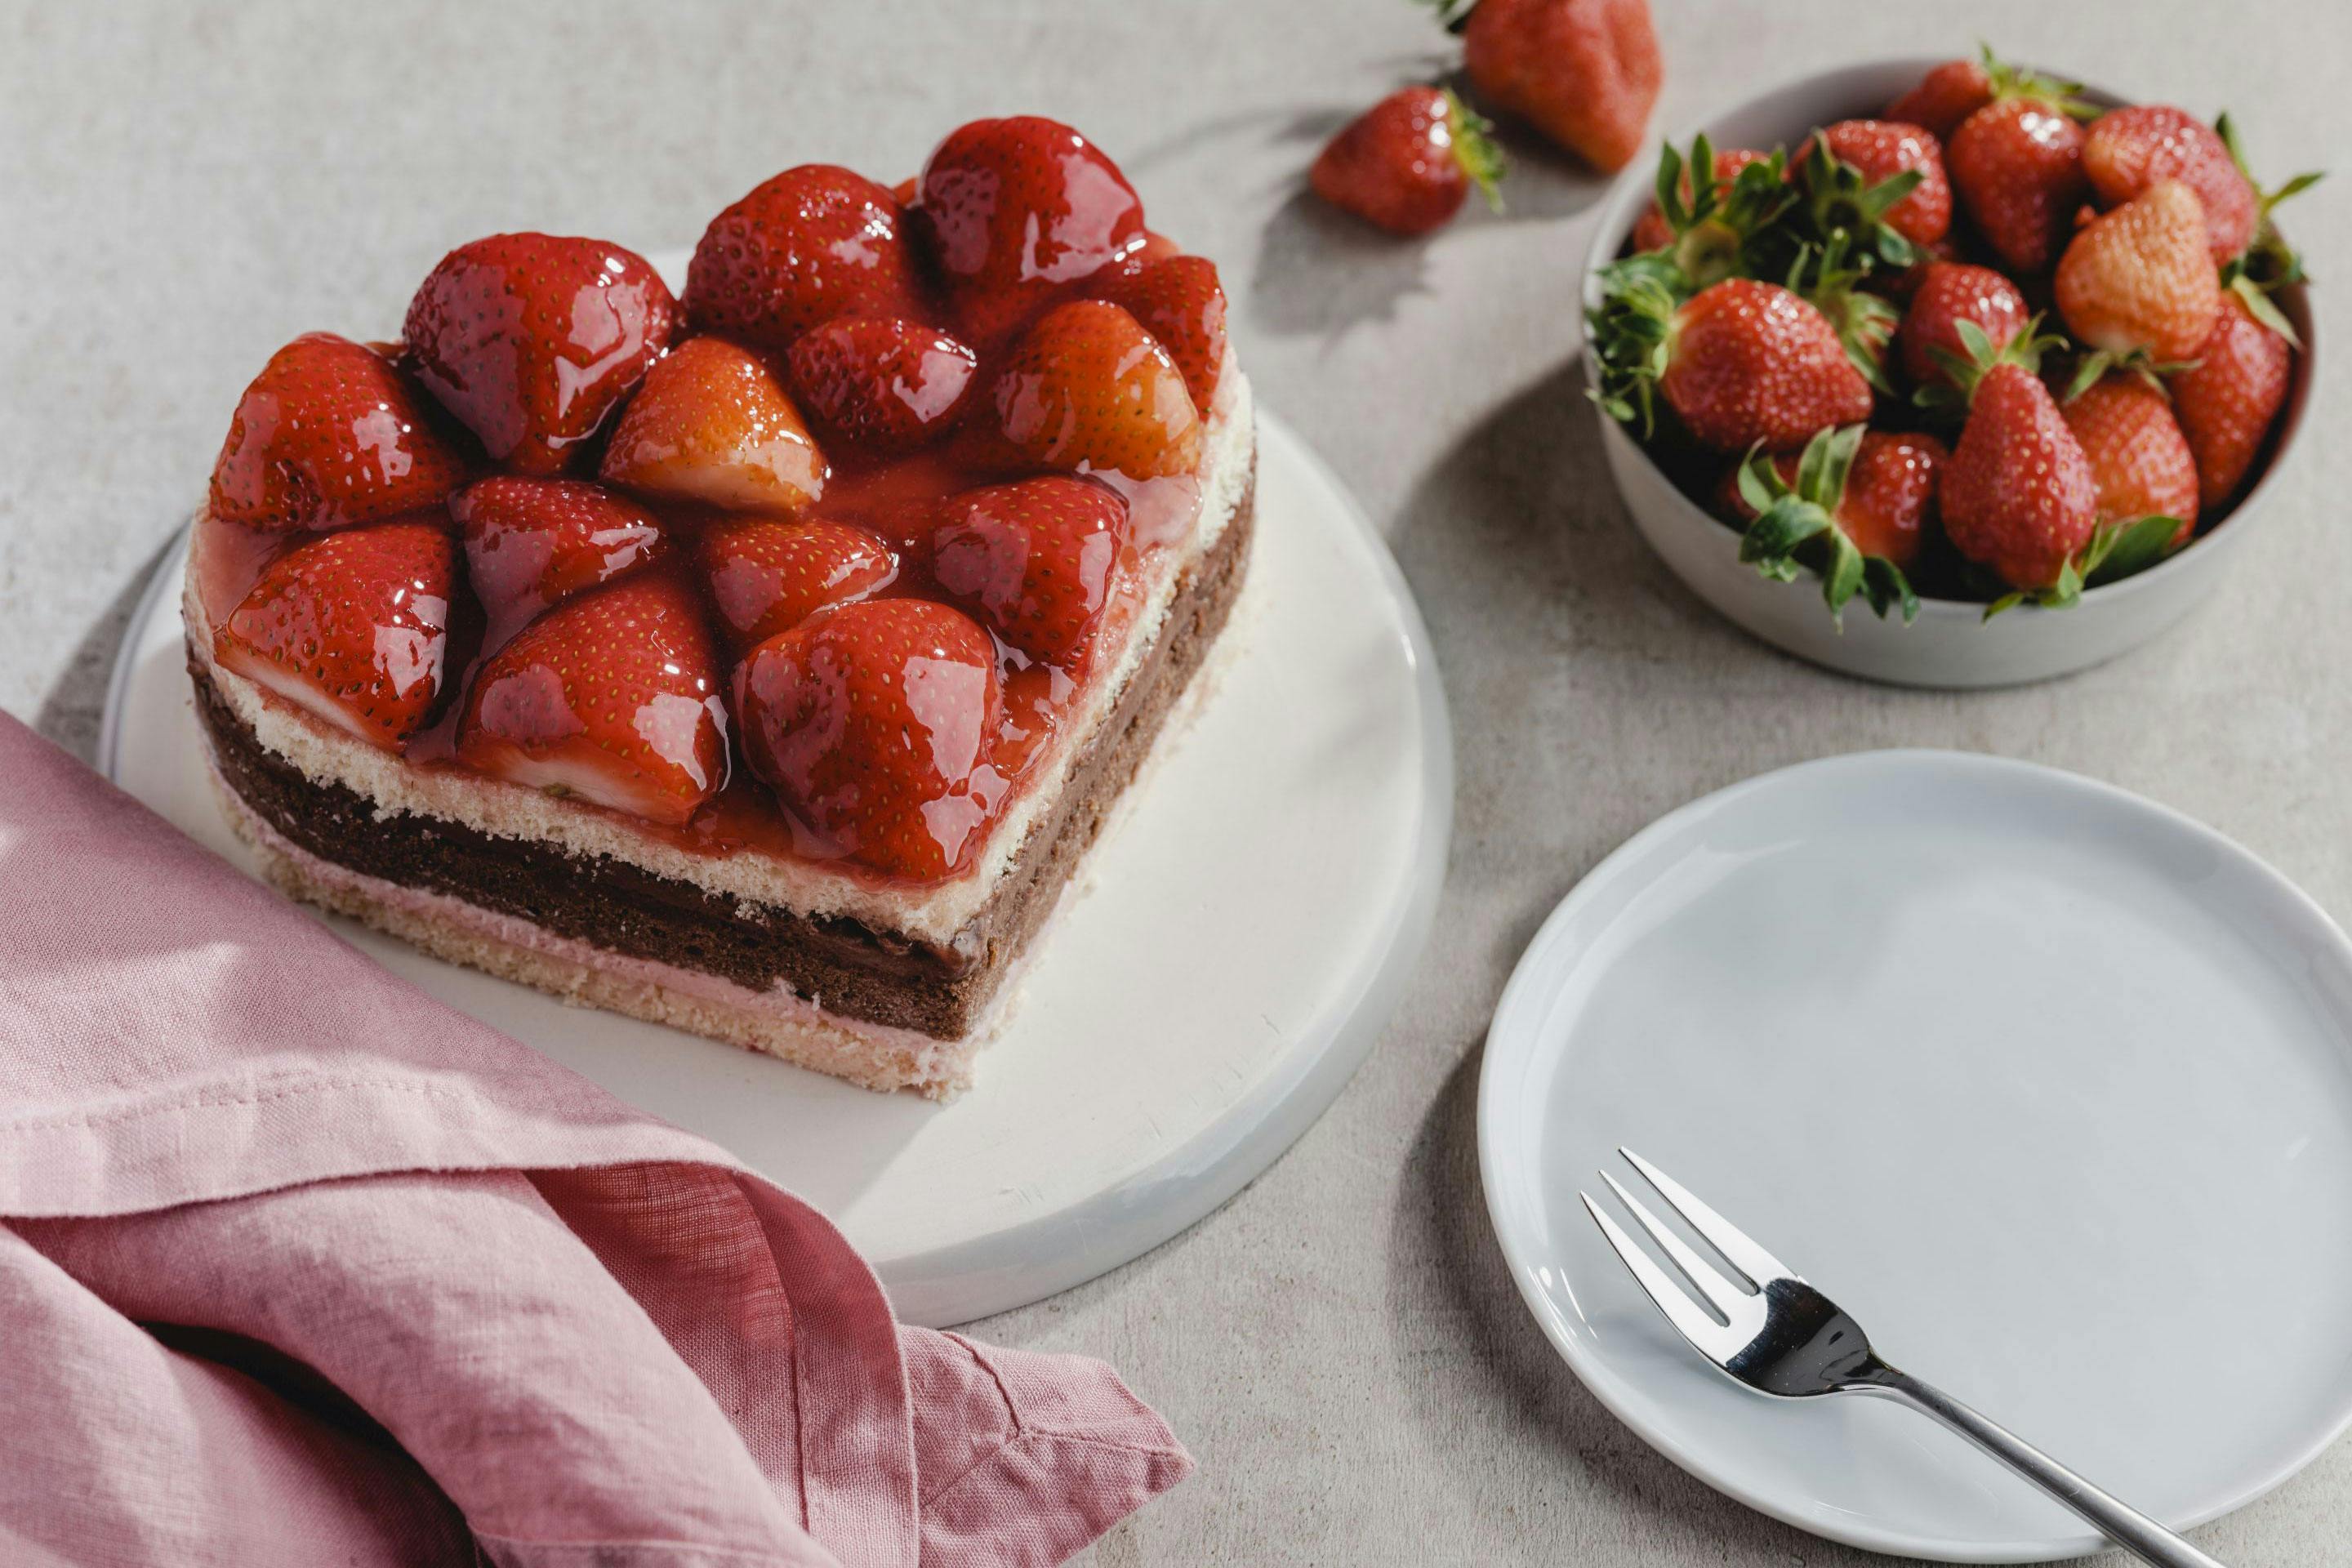 Strawberry chocolate cake in the shape of a heart and a bowl with strawberries as well as a napkin and a plate with a cake fork